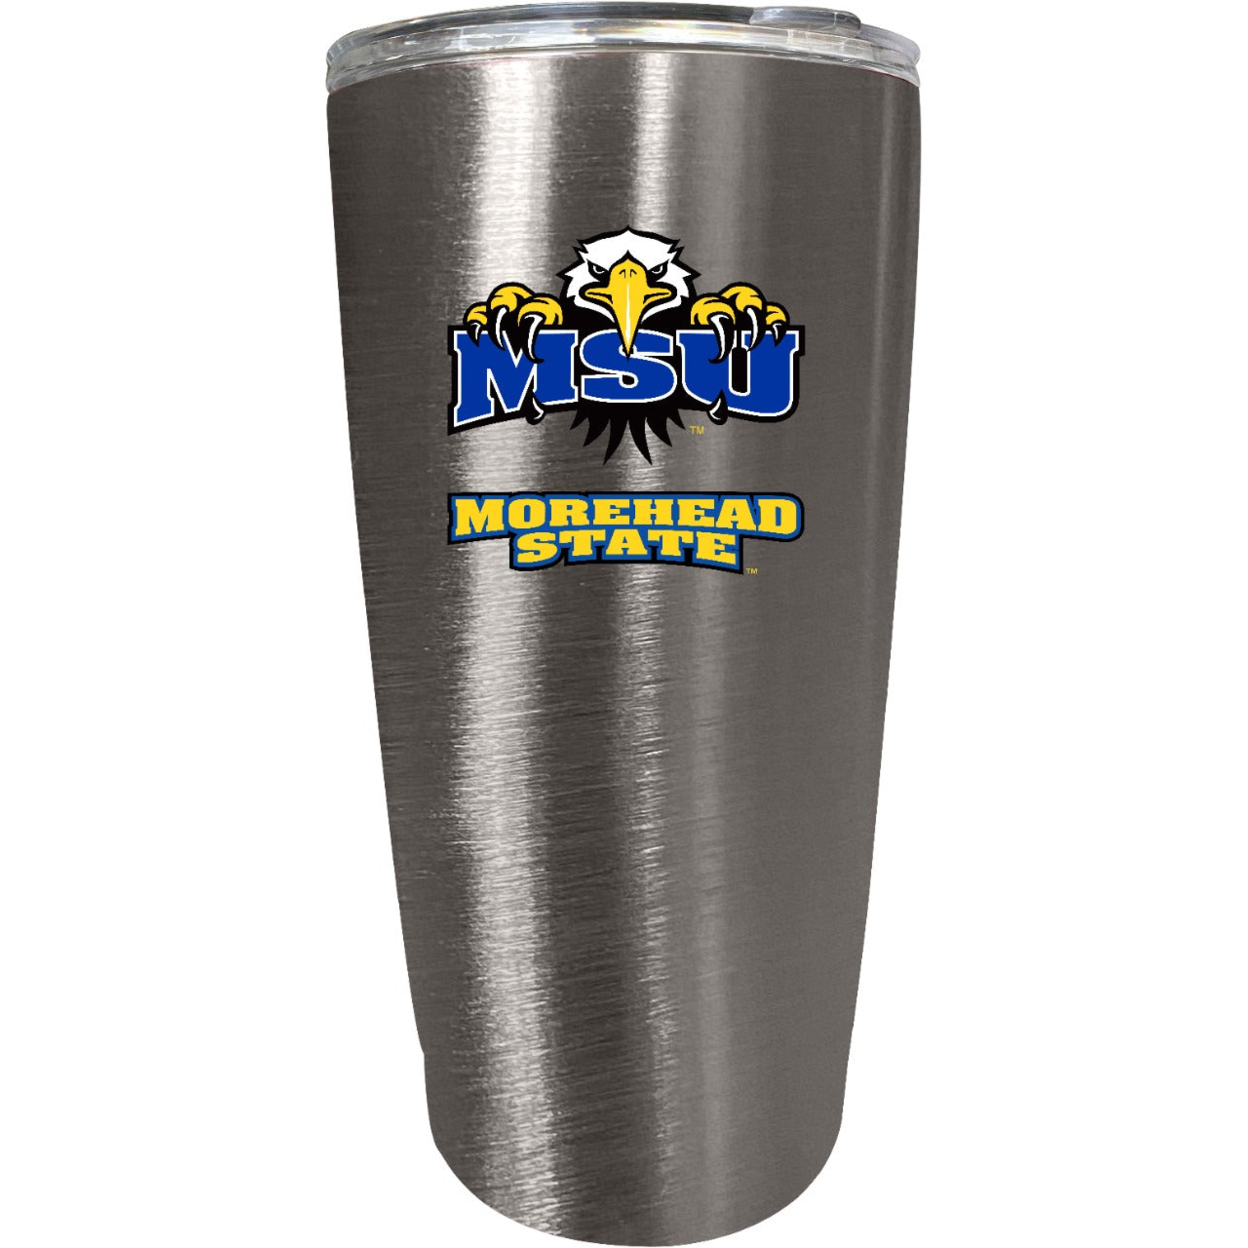 Morehead State University 16 Oz Insulated Stainless Steel Tumbler Colorless